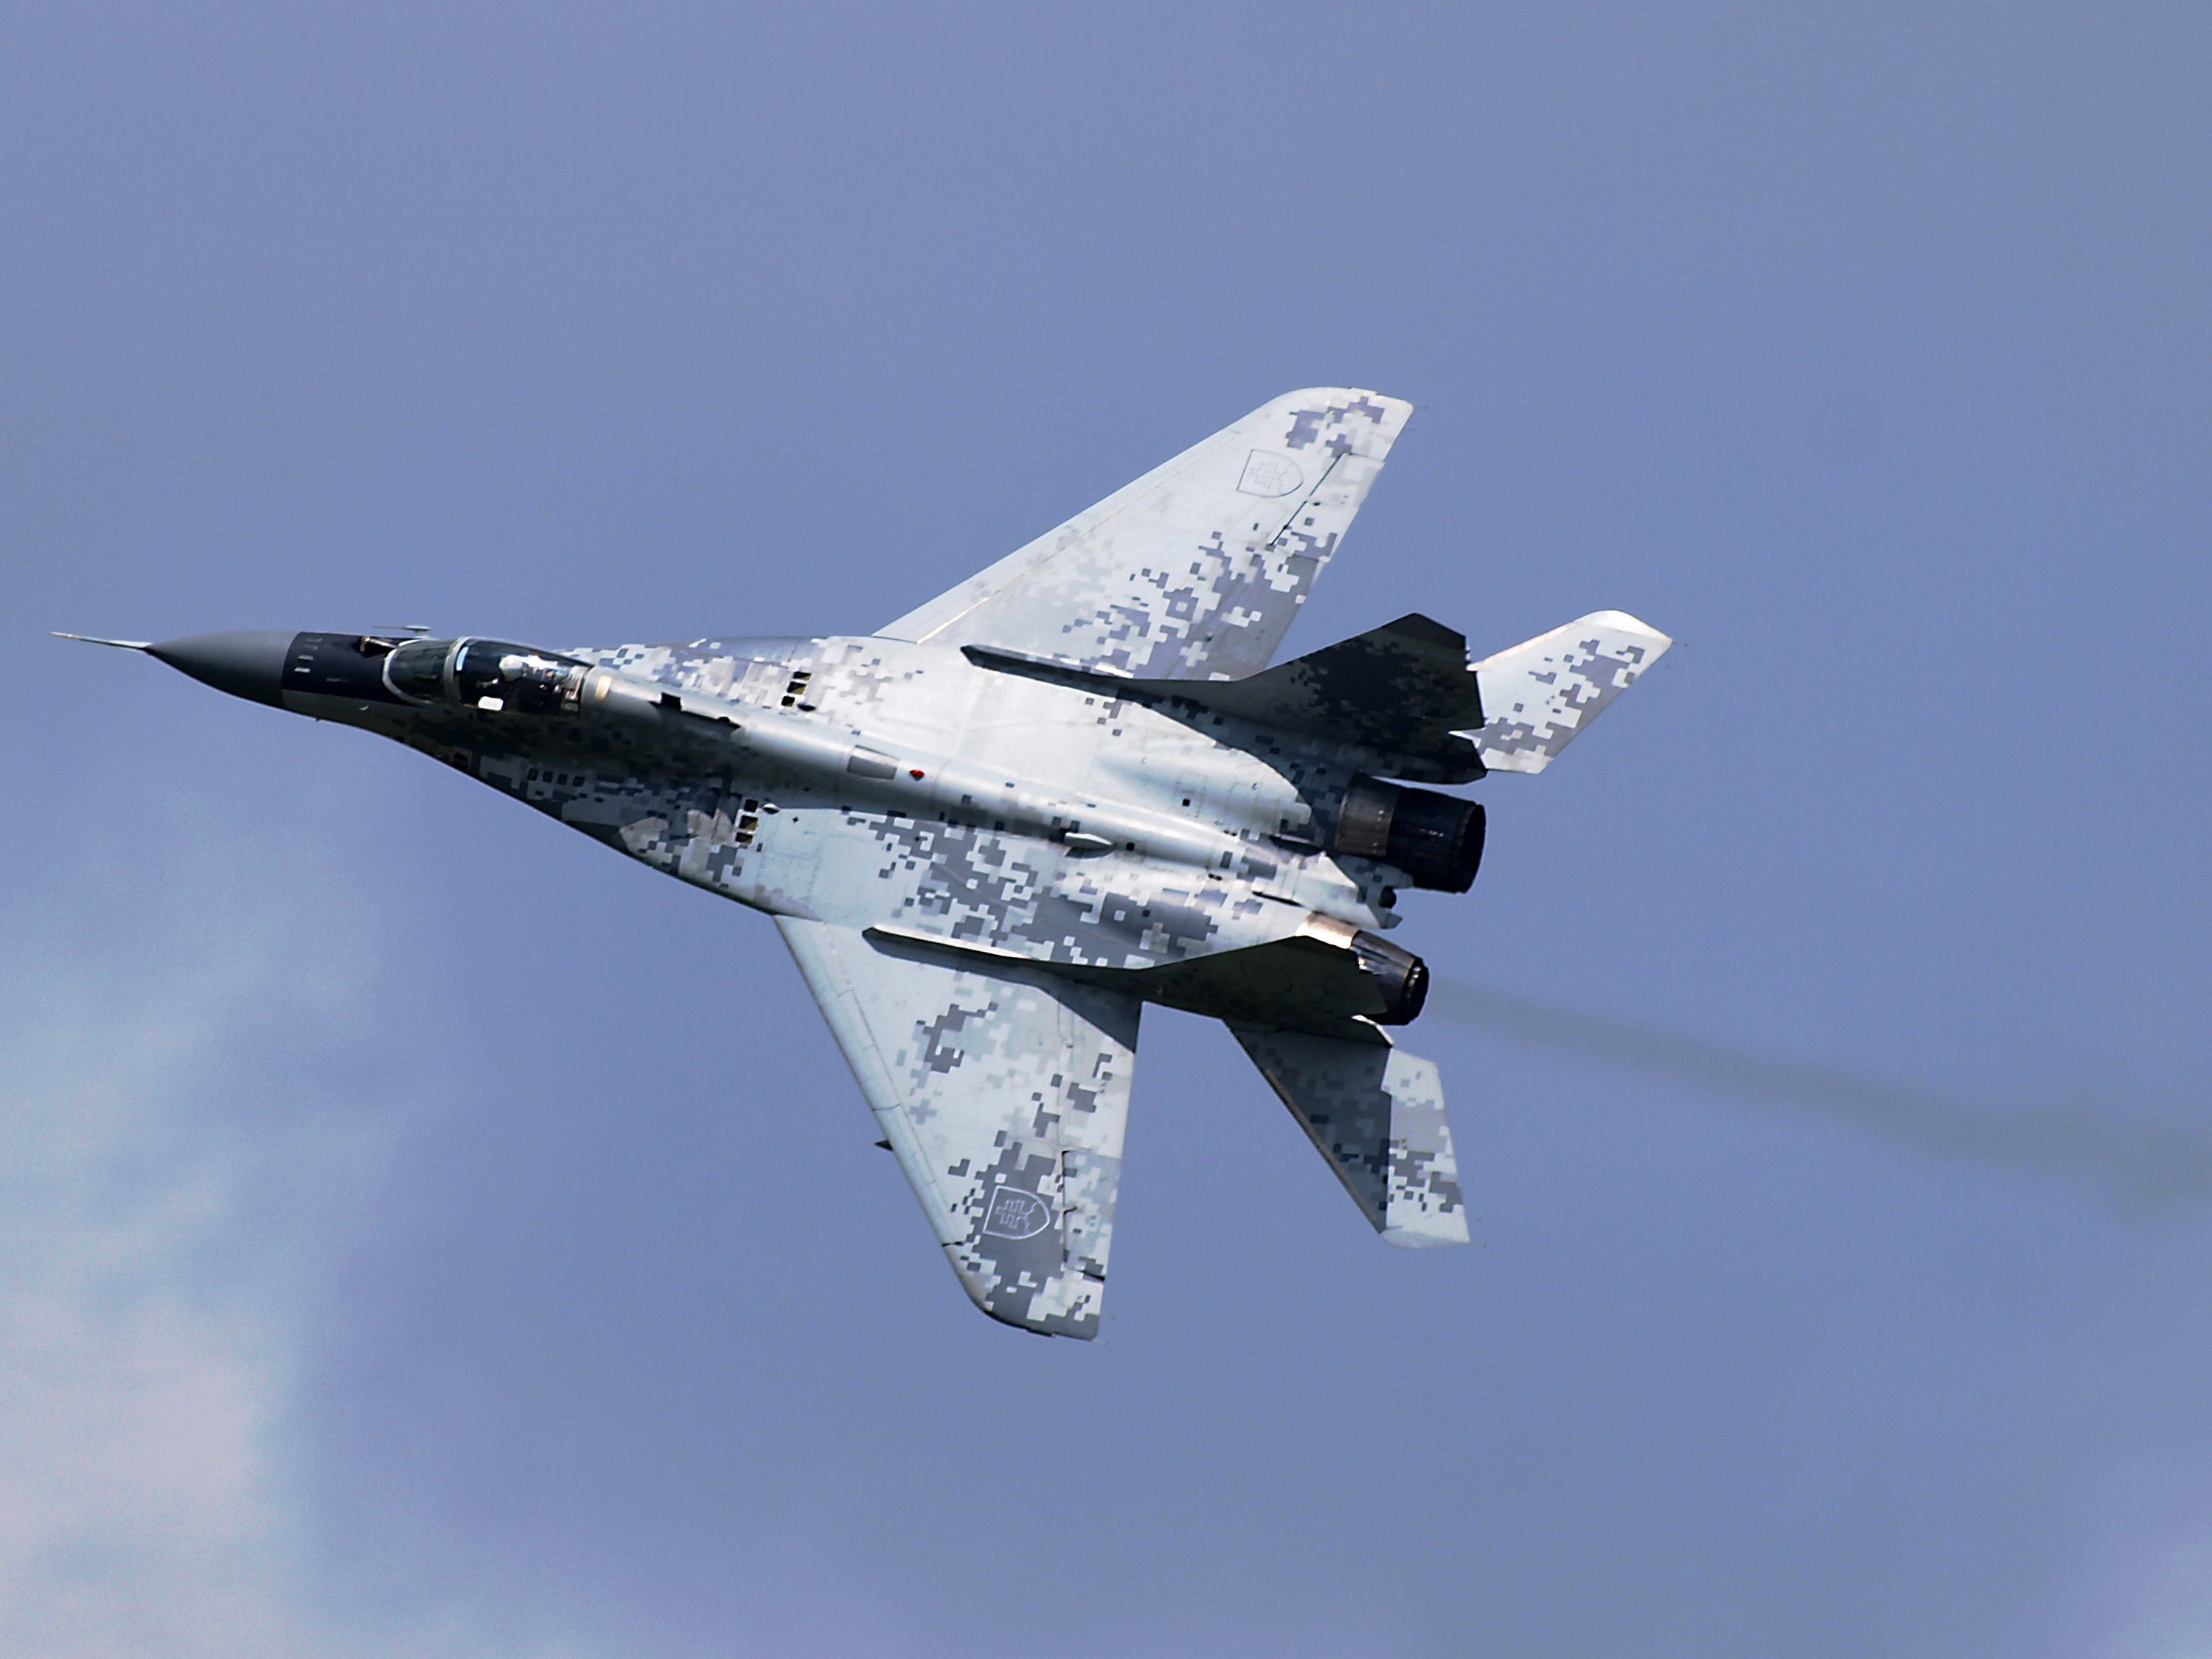 mig 29, Fighter, Jet, Military, Russian, Airplane, Plane, Mig,  43 , Jpg Wallpaper